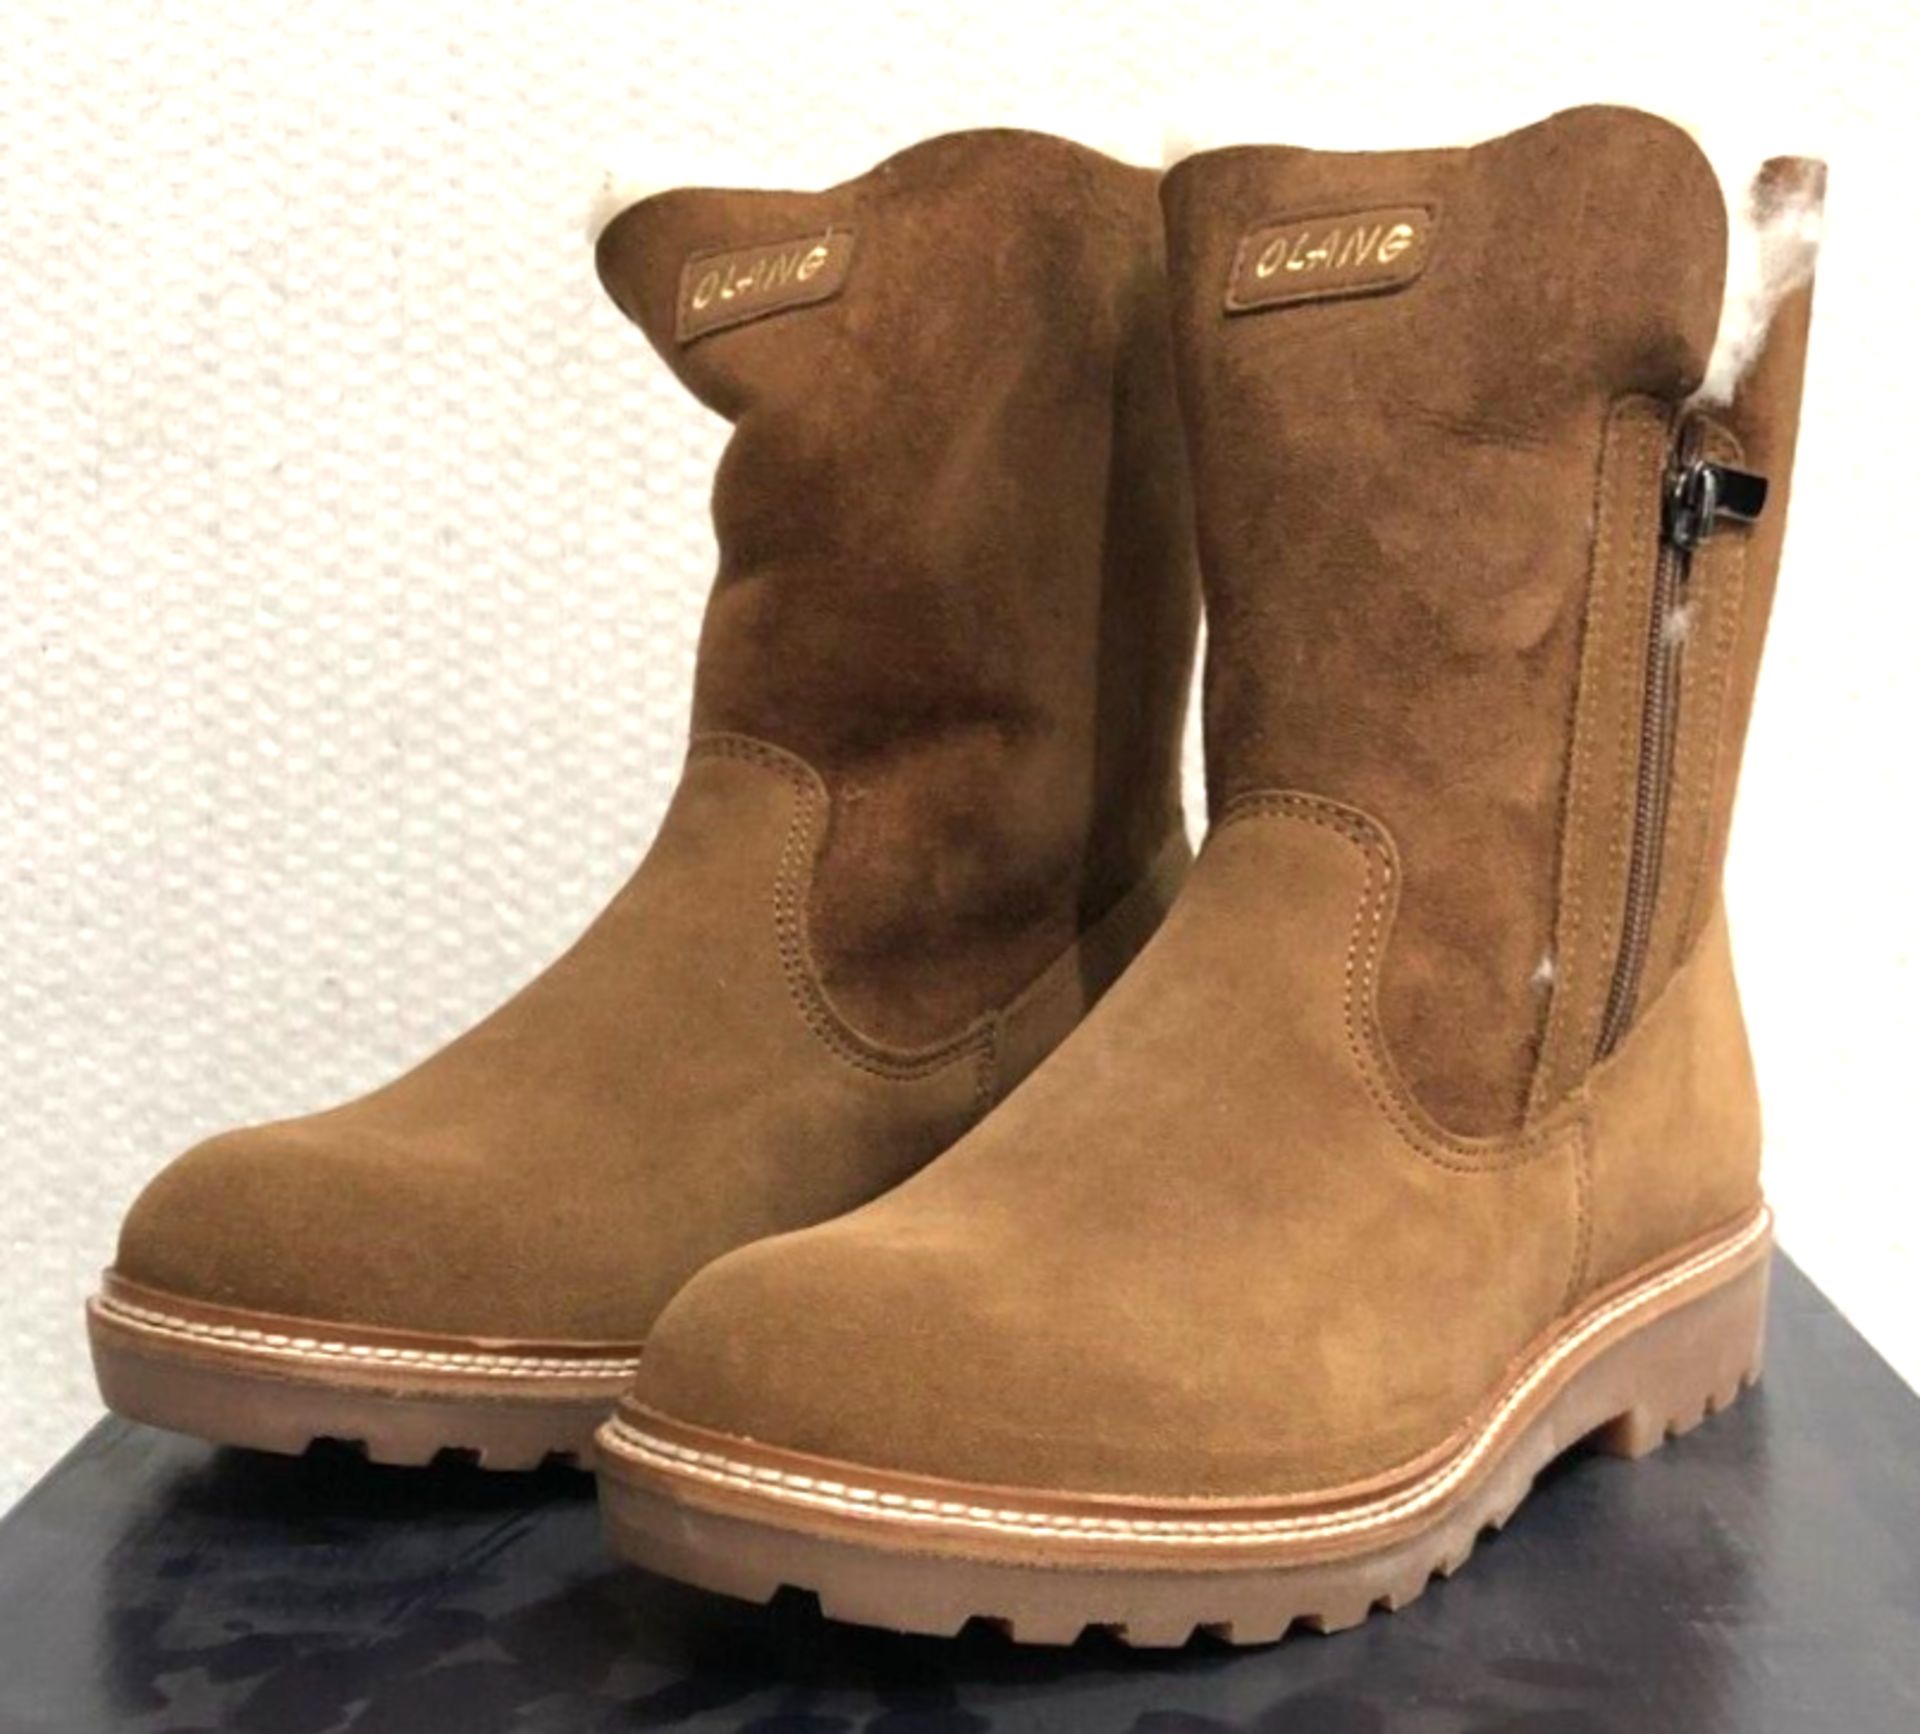 1 x Pair of Designer Olang Women's Winter Boots - Agata 85 Cuoio - Euro Size 38 - New Boxed - Image 2 of 4